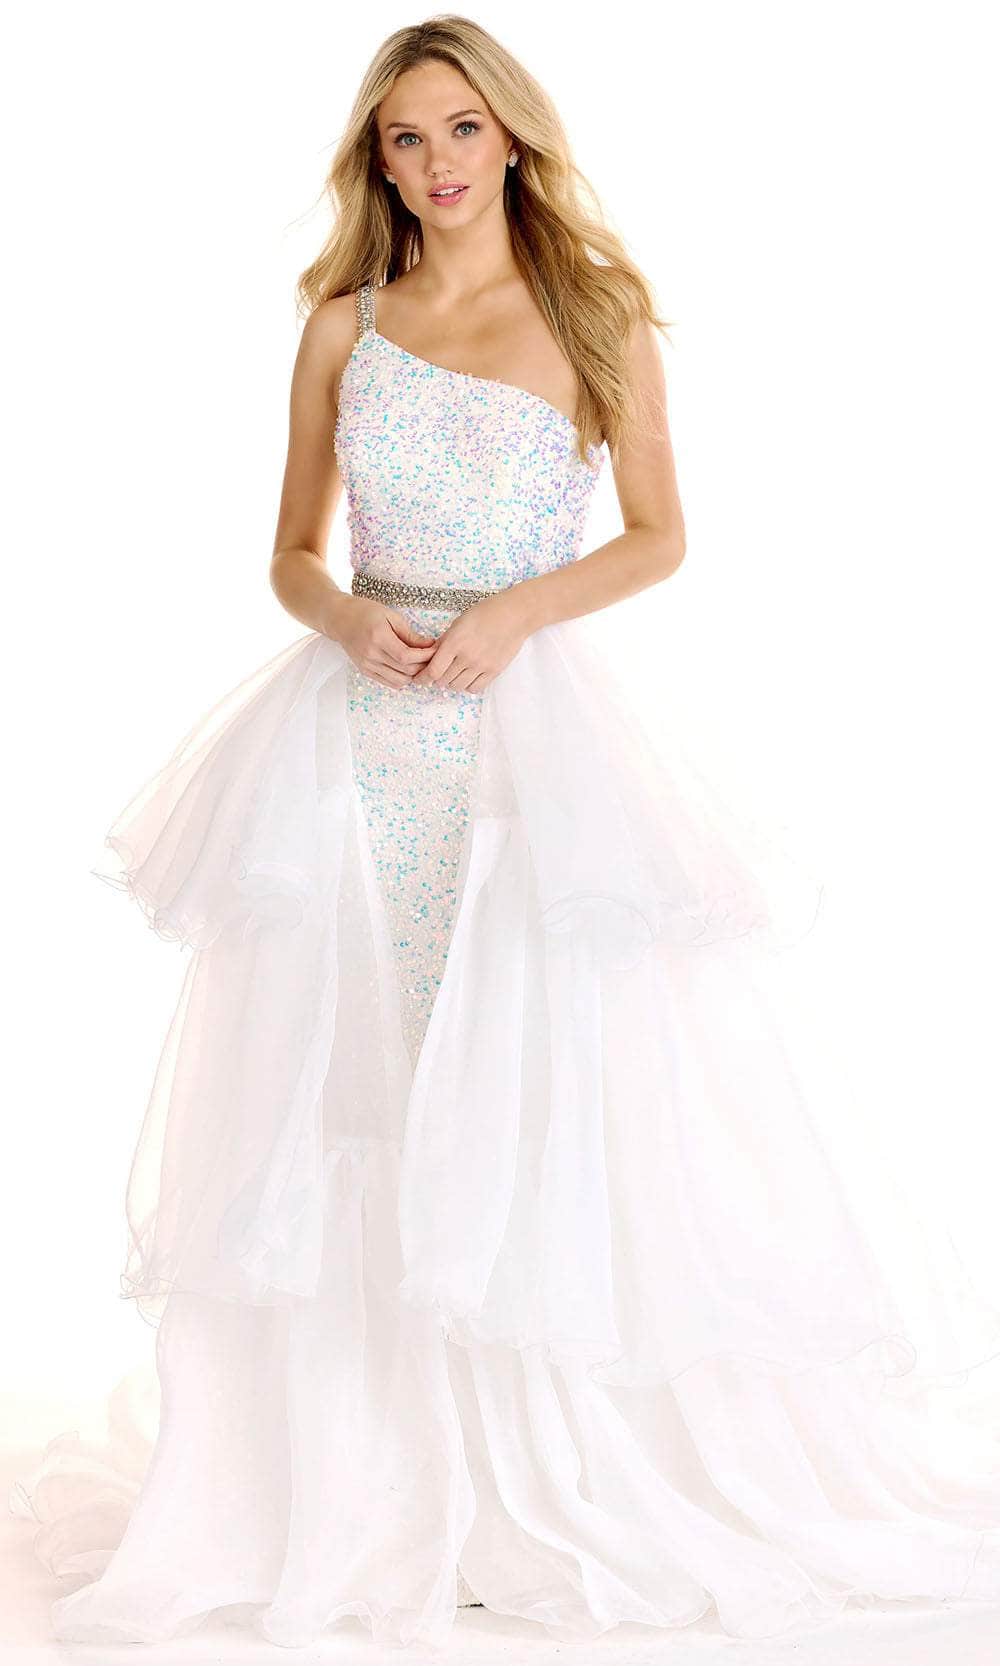 Ava Presley 27715 - Sequin Tiered Panel Prom Dress Special Occasion Dresse 00 /  Iridescent White